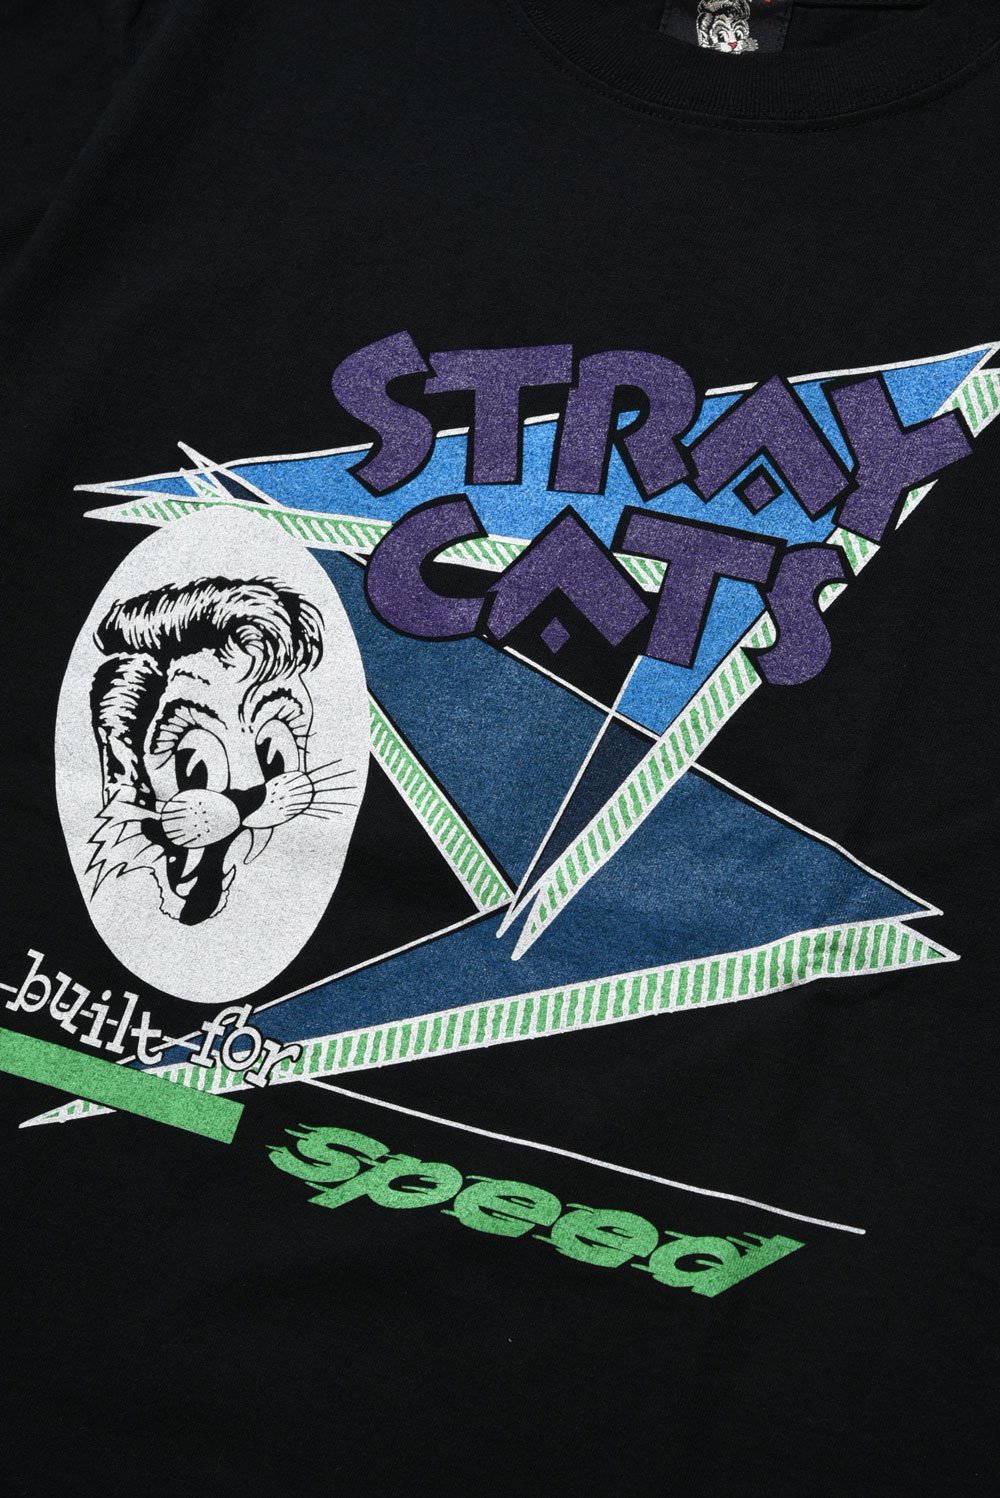 STYLE EYES(スタイルアイズ) Tシャツ STRAY CATS×STYLE EYES 